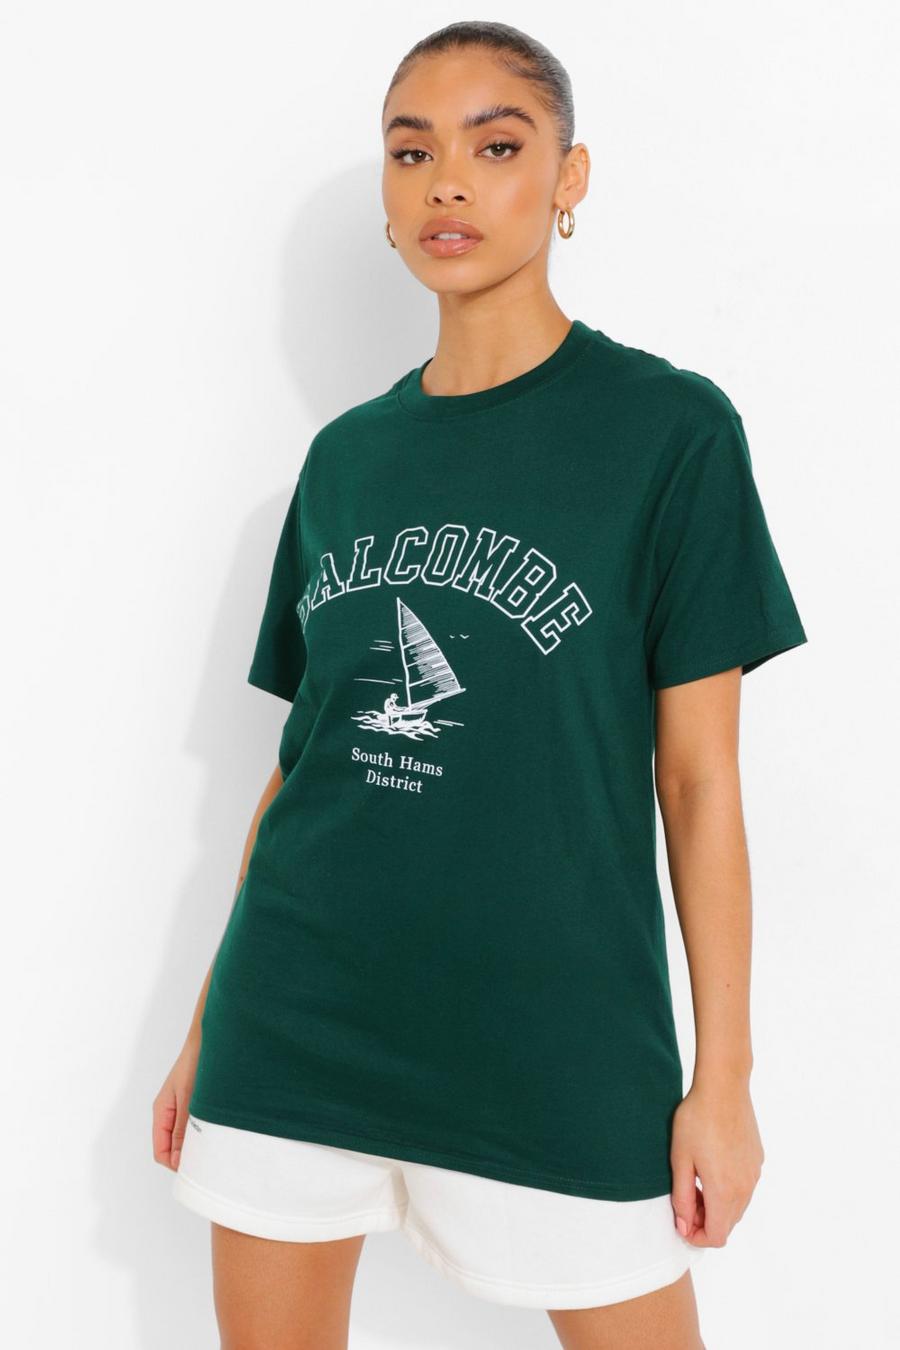 T-shirt con grafica "Salcombe", Bottle green image number 1